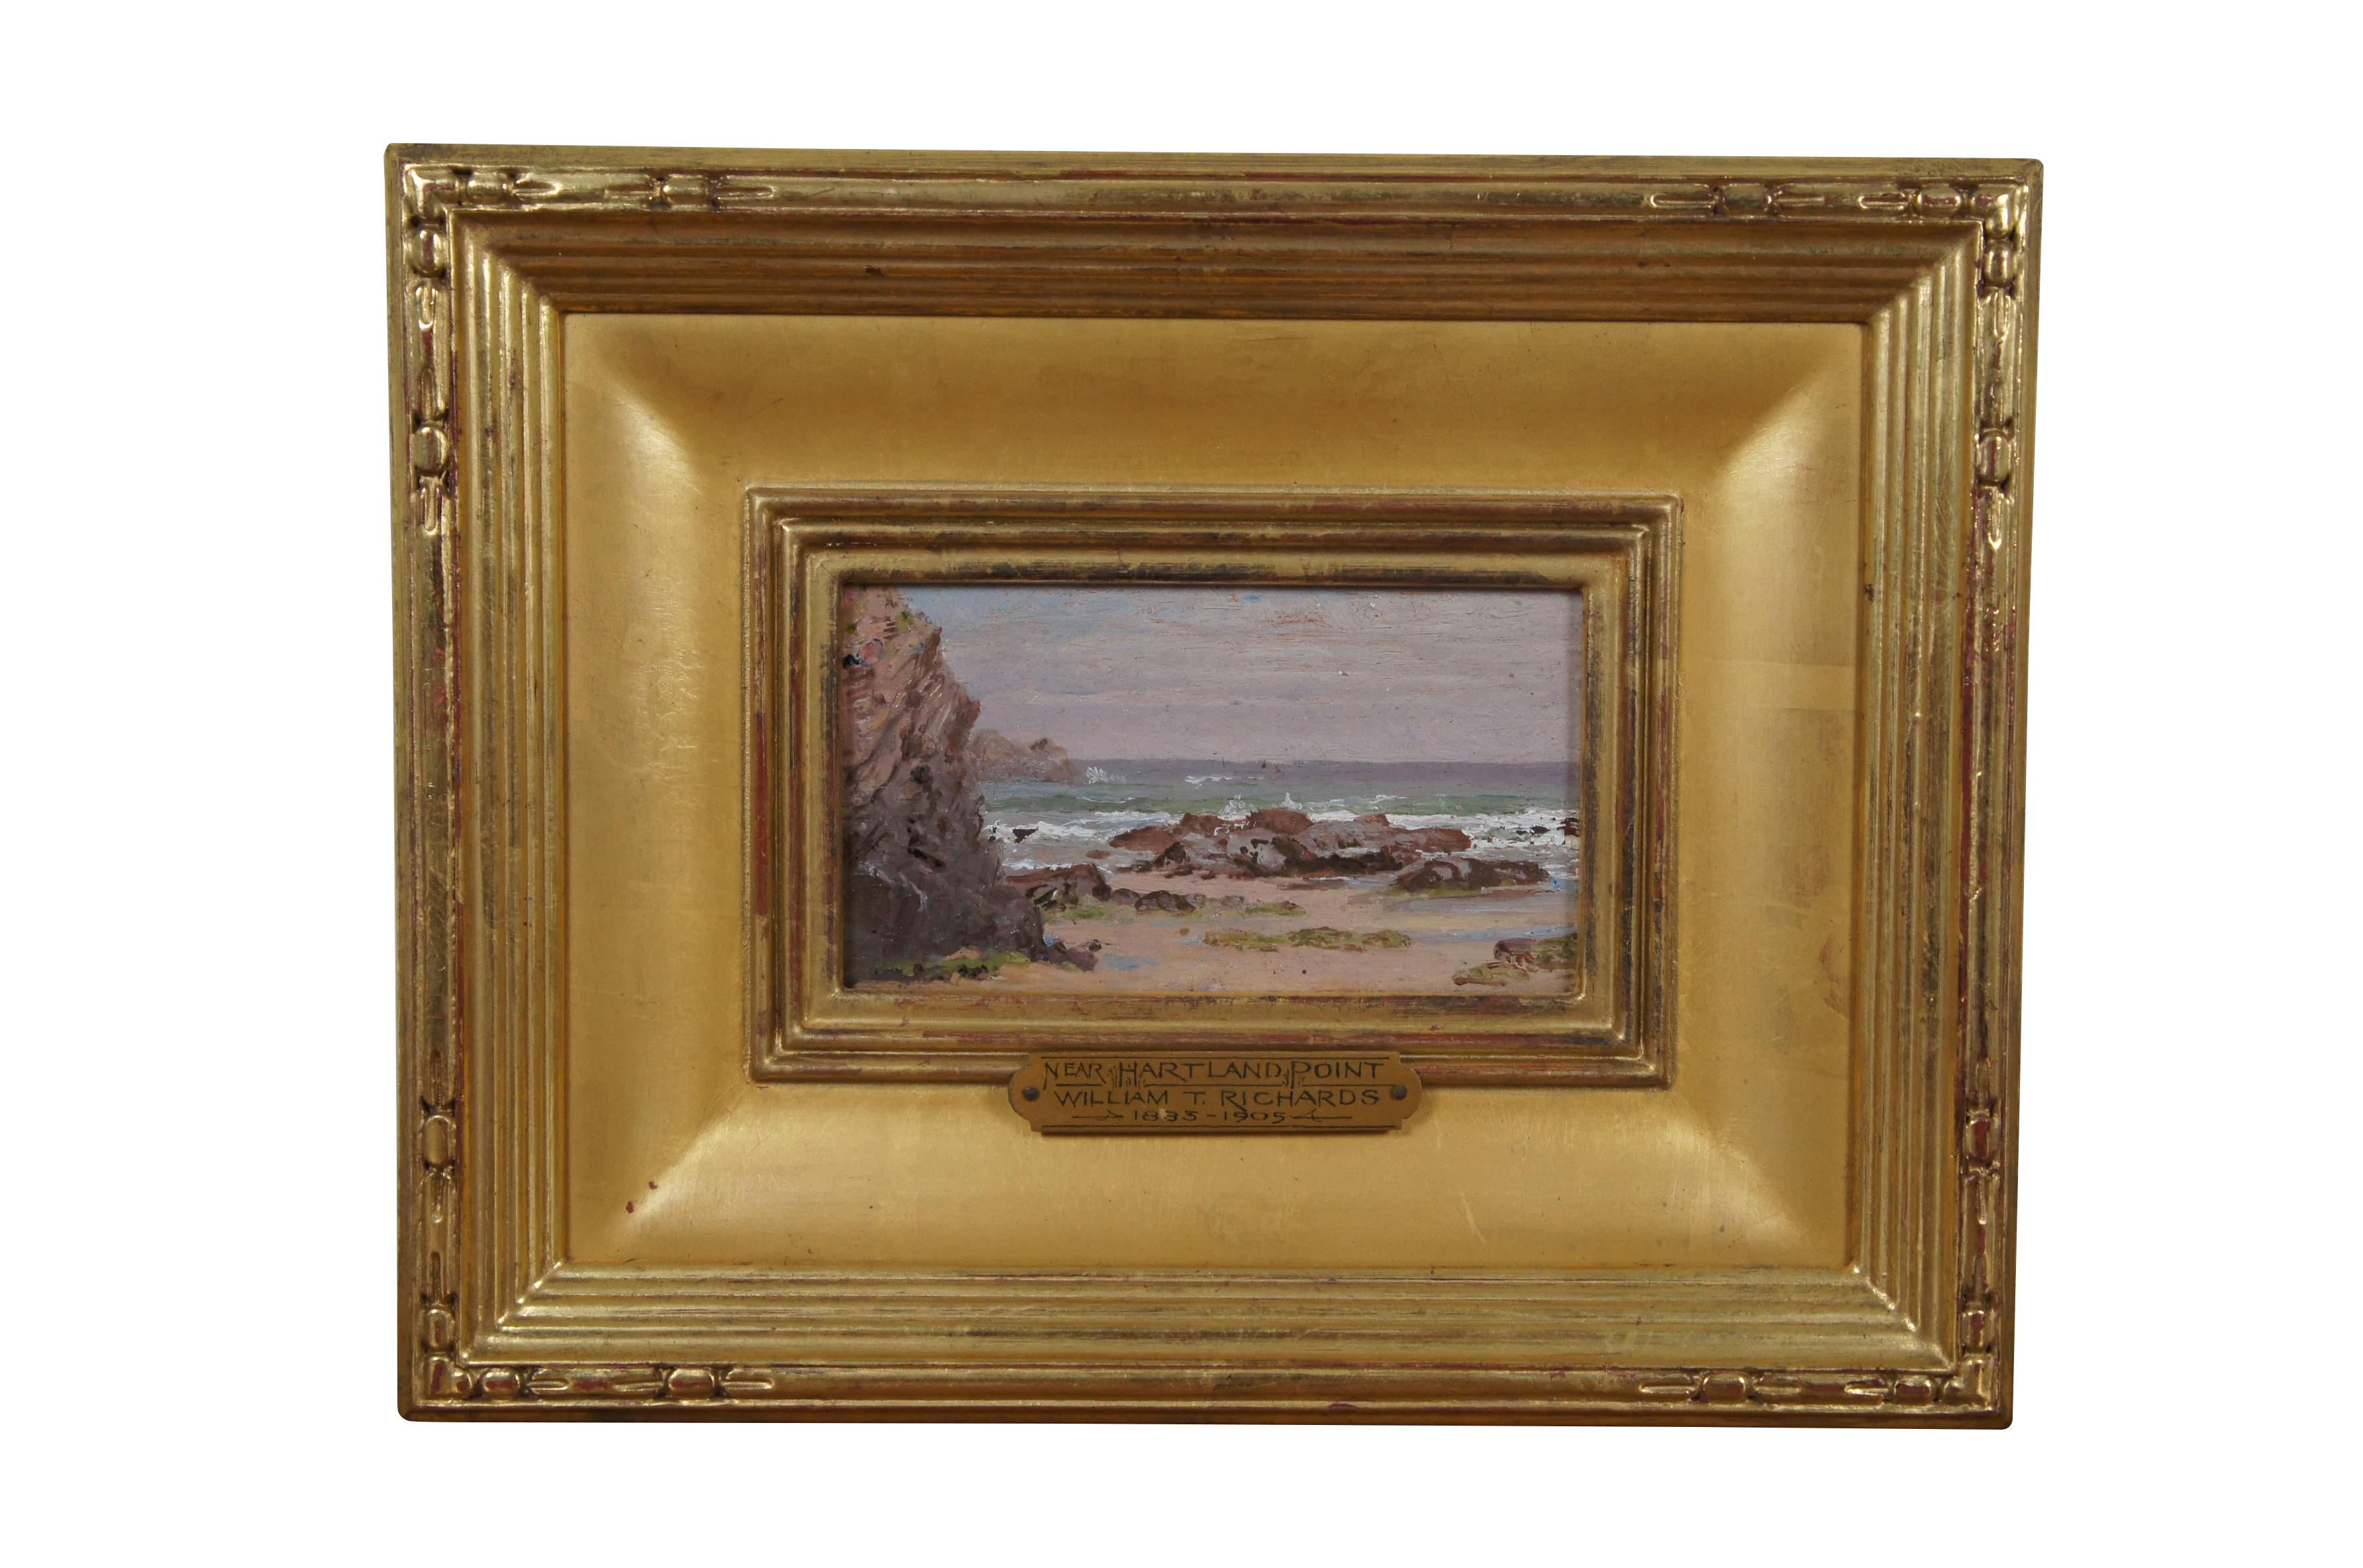 3 William Richards Oil on Board Seascape Paintings Capri Naples Hartland Point In Good Condition For Sale In Dayton, OH